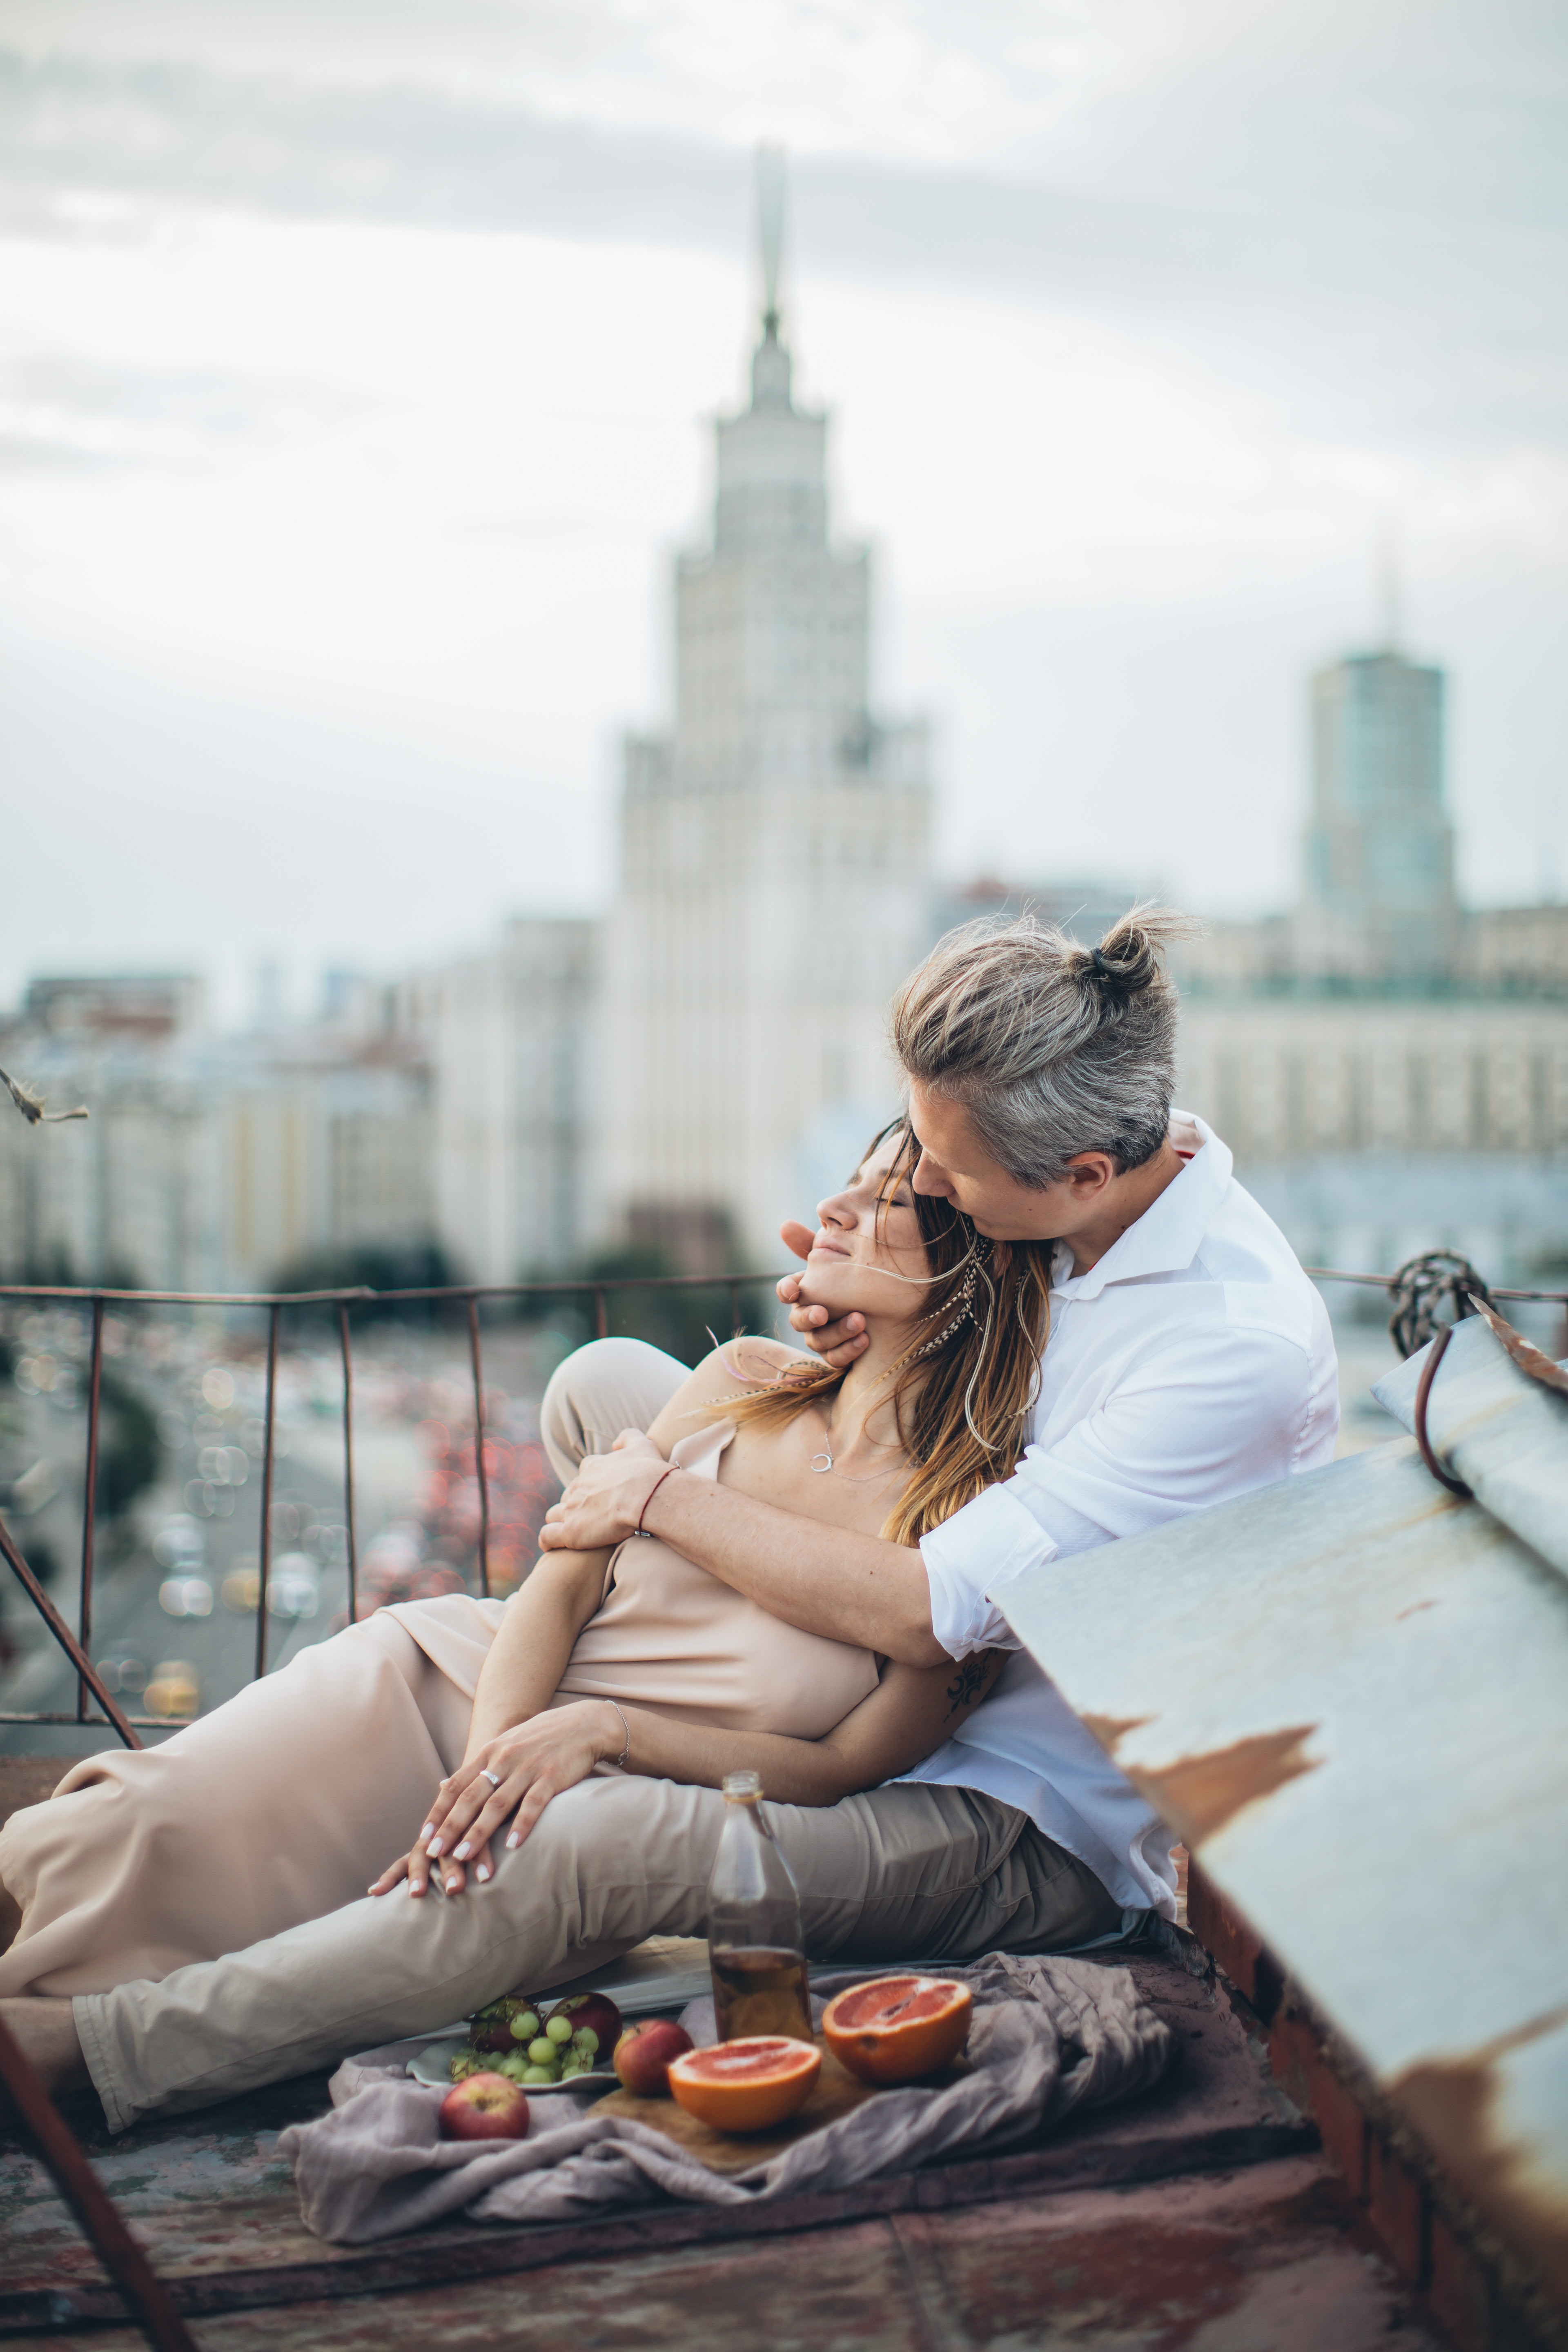 Couple on a date on a rooftop. | Source: Pexels